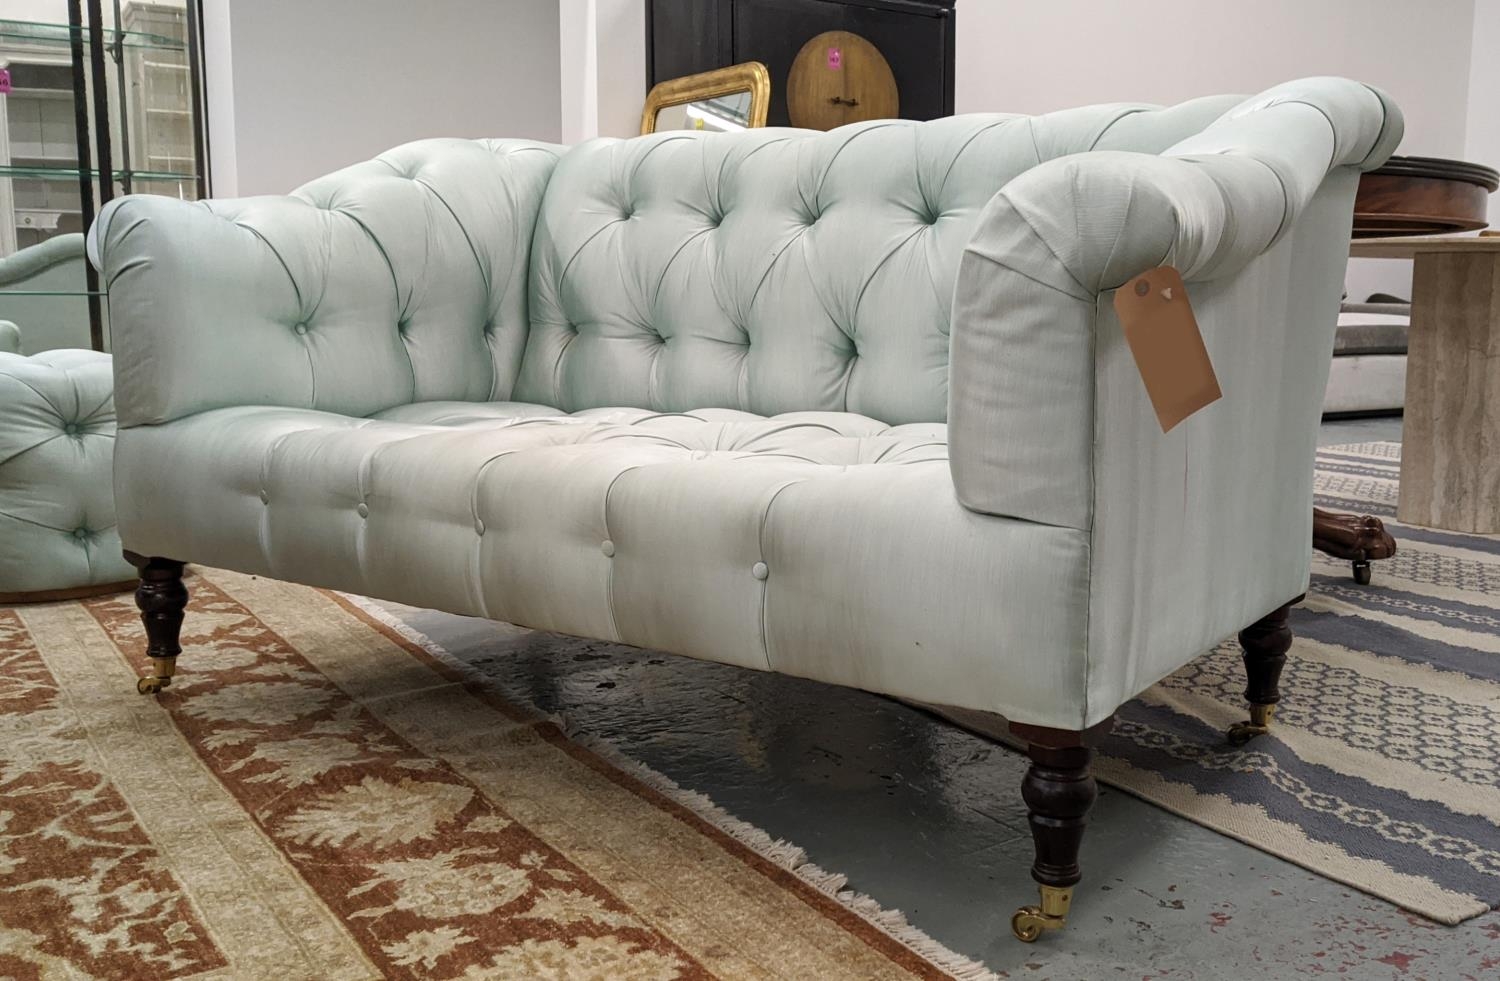 GEORGE SMITH SOFA, two seater, deep buttoned with light turquoise upholstery, 166cm W x 90cm H x - Image 2 of 8